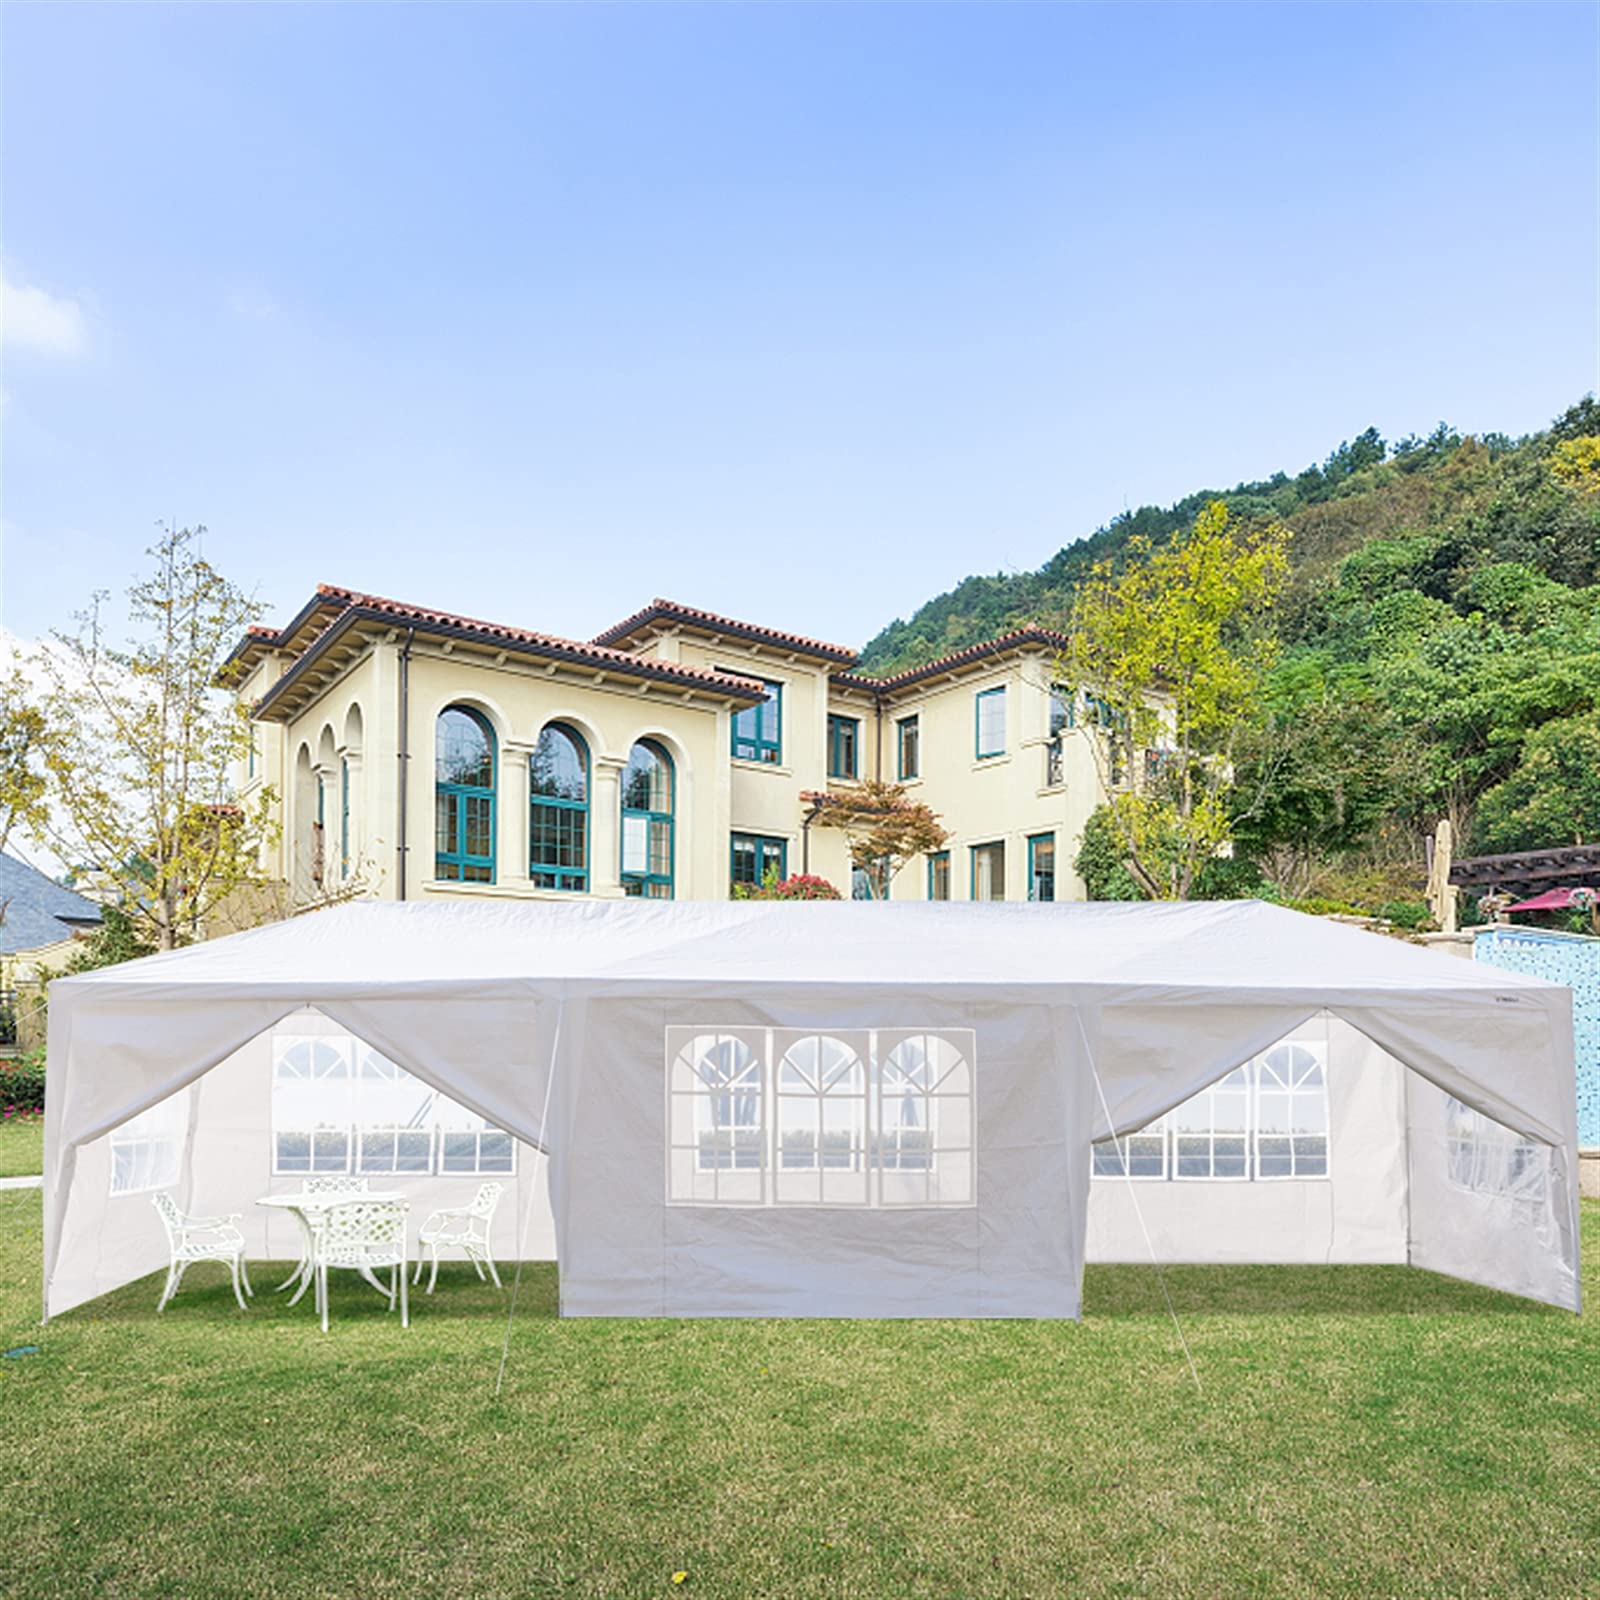 Party Tent 10 x 30' for Parties Heavy Duty Outdoor Wedding Tent White Large Patio Gazebo Carport Canopy Shade, 8-Sided Tents Removable Walls, Perfect for Birthday,Graduation,BBQ